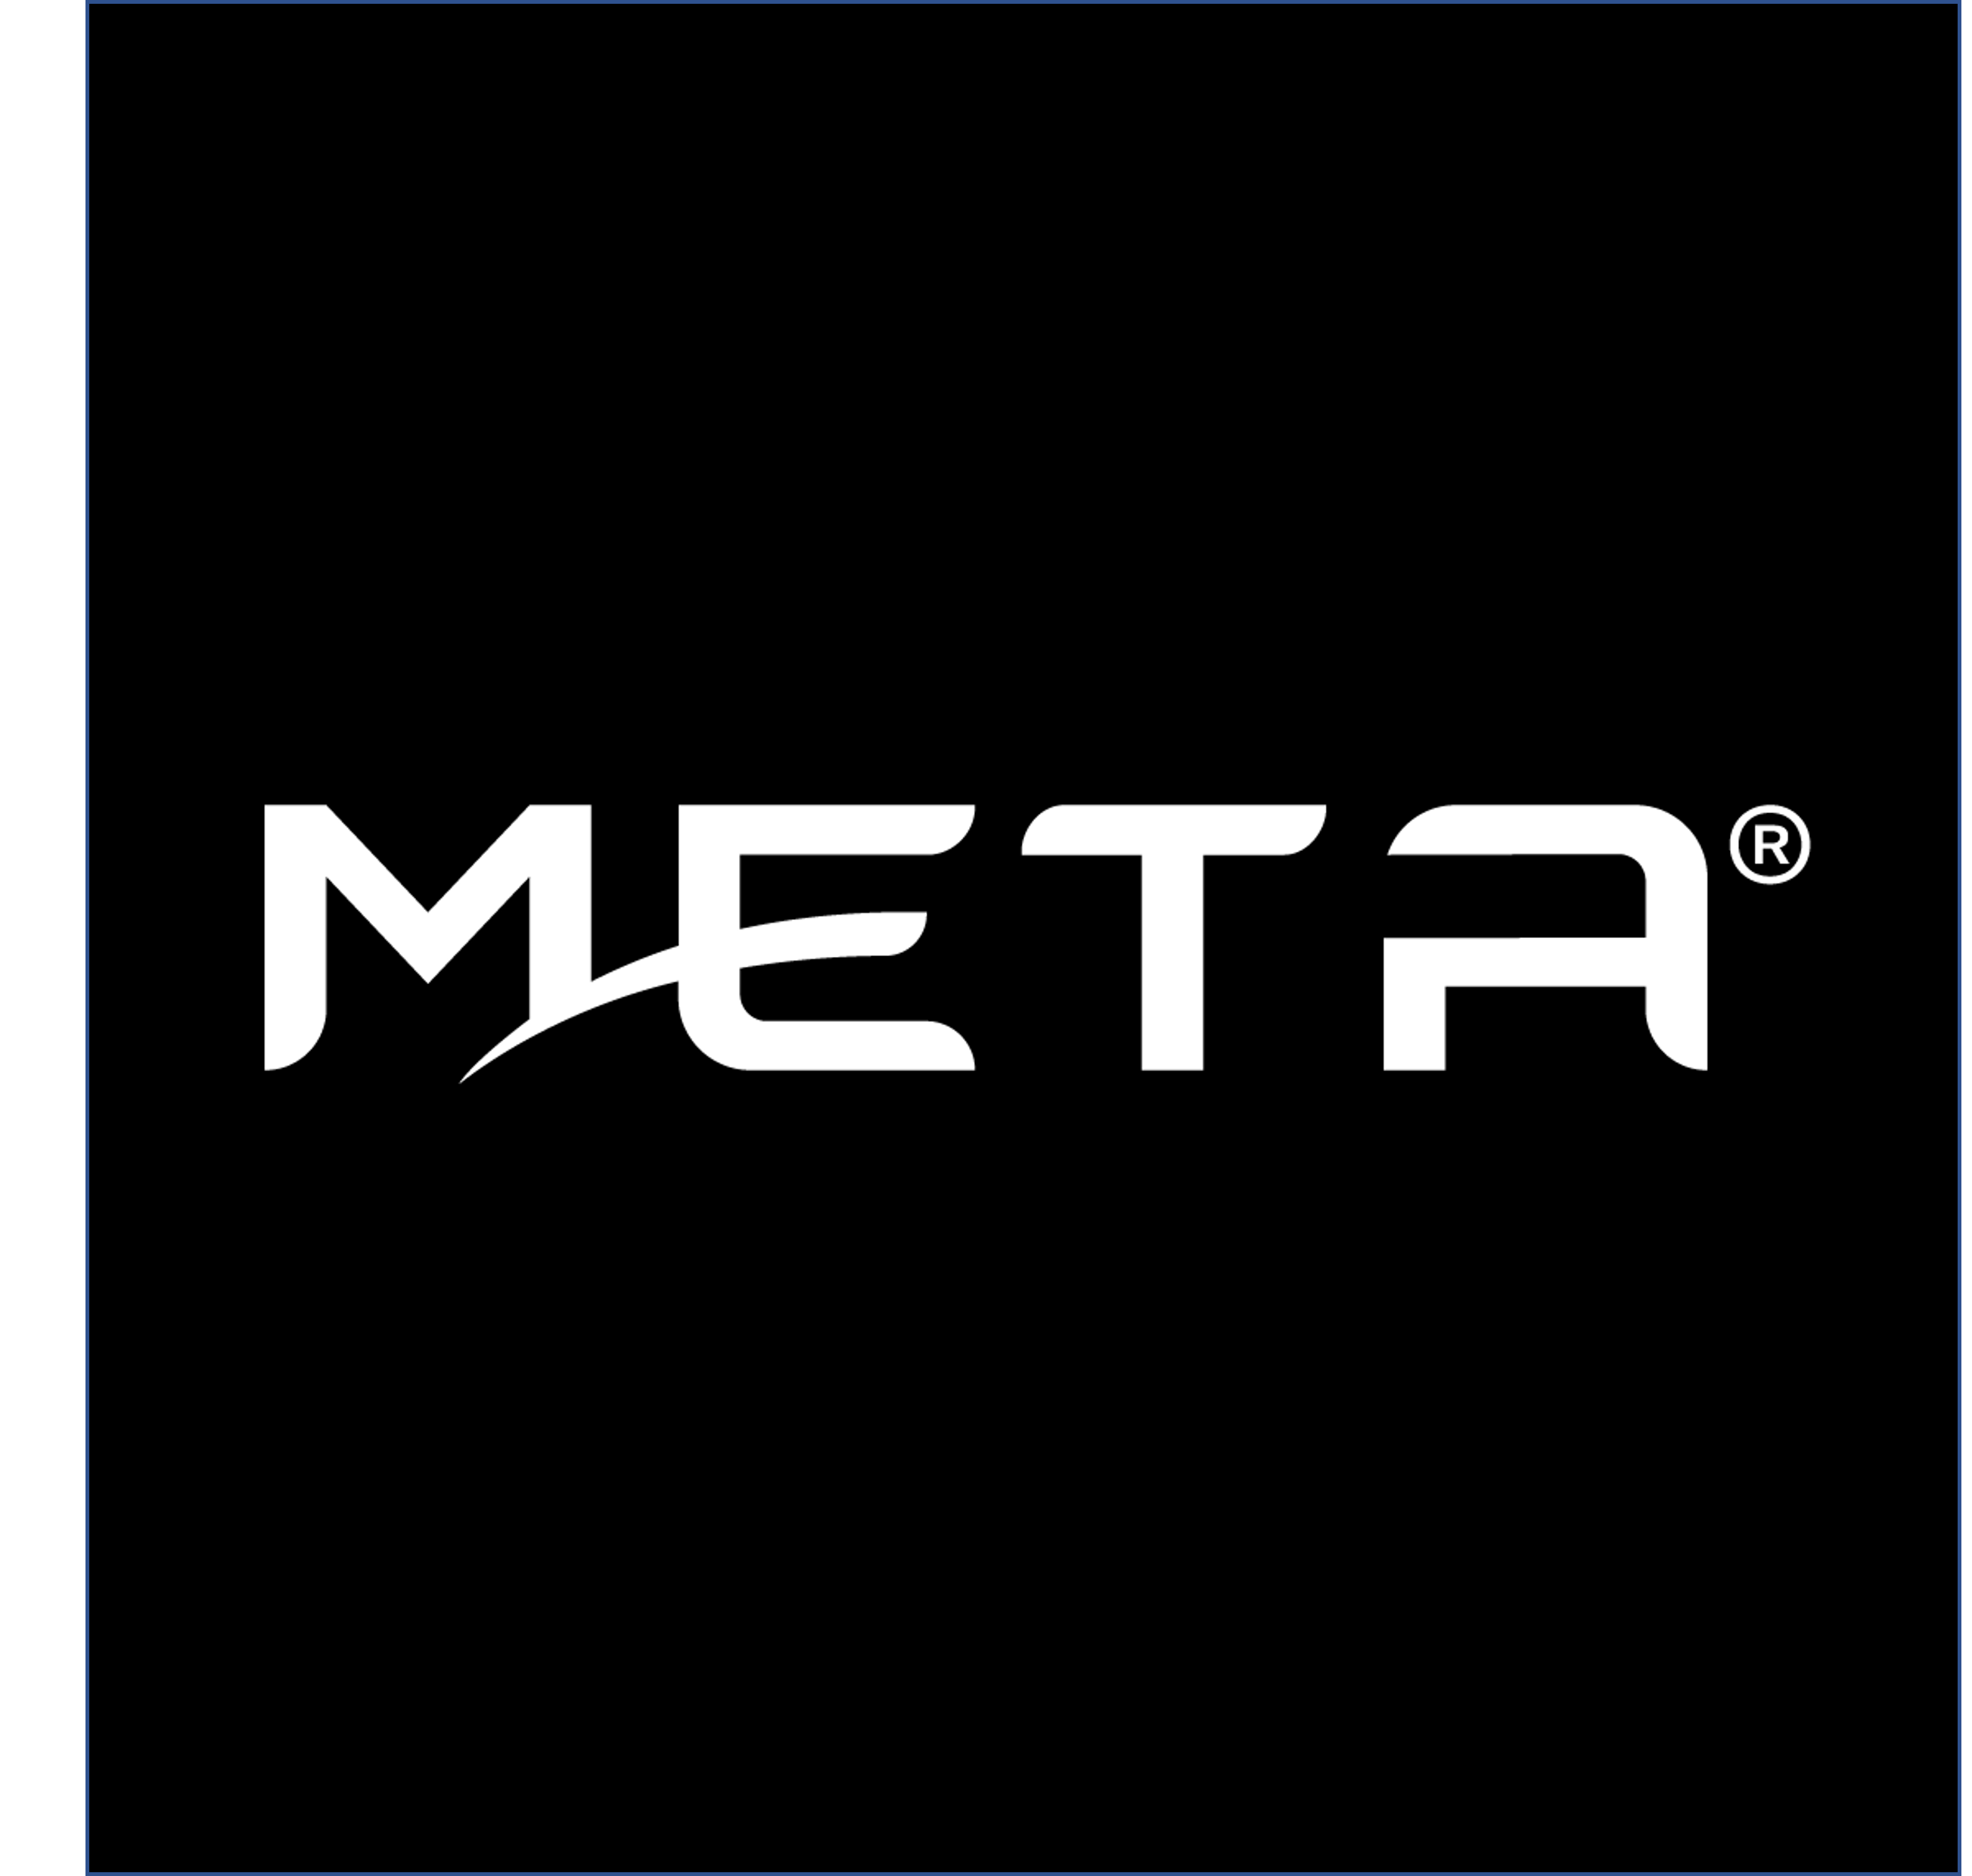 Meta Materials Inc., Friday, July 30, 2021, Press release picture